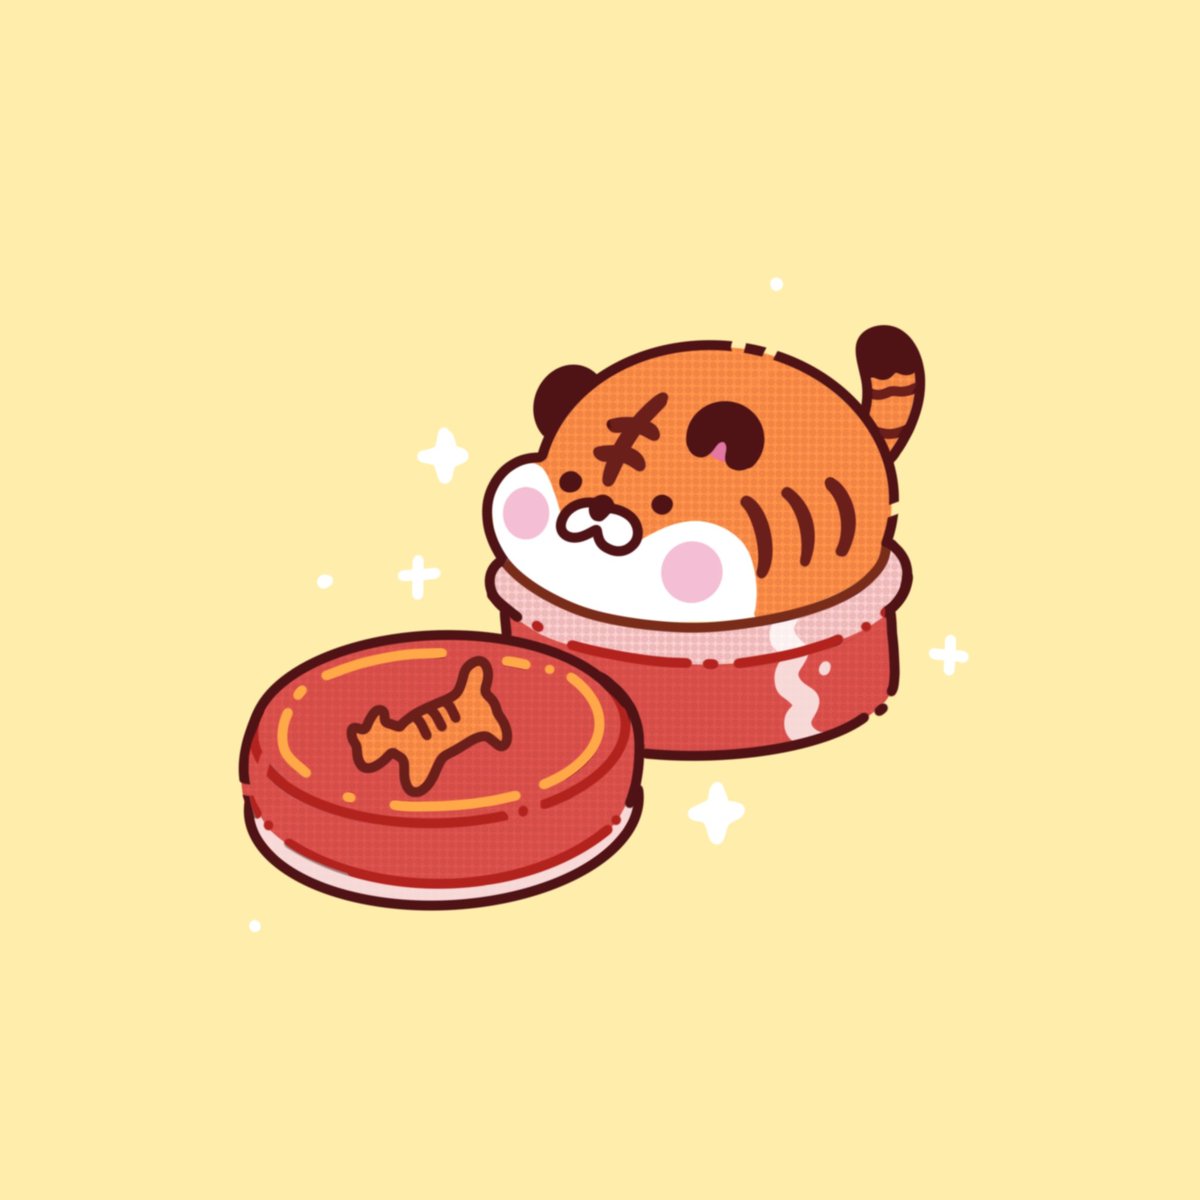 「tiger balm 」|Anelien ✨ sticker con day 2✨のイラスト